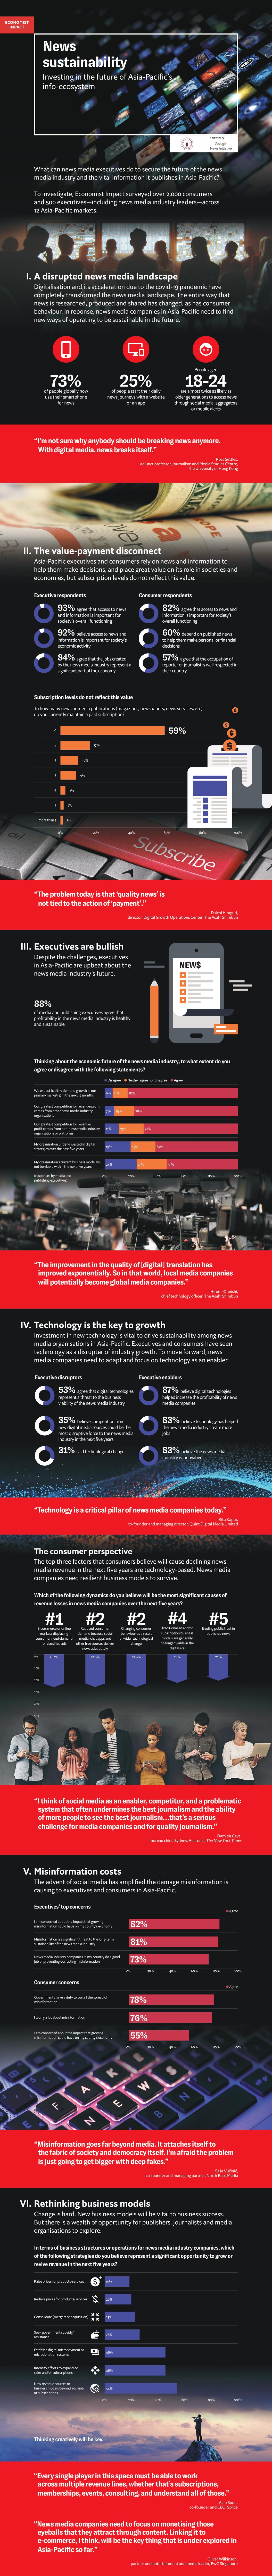 Infographic | News sustainability: investing in the future of Asia-Pacific’s info-ecosystem